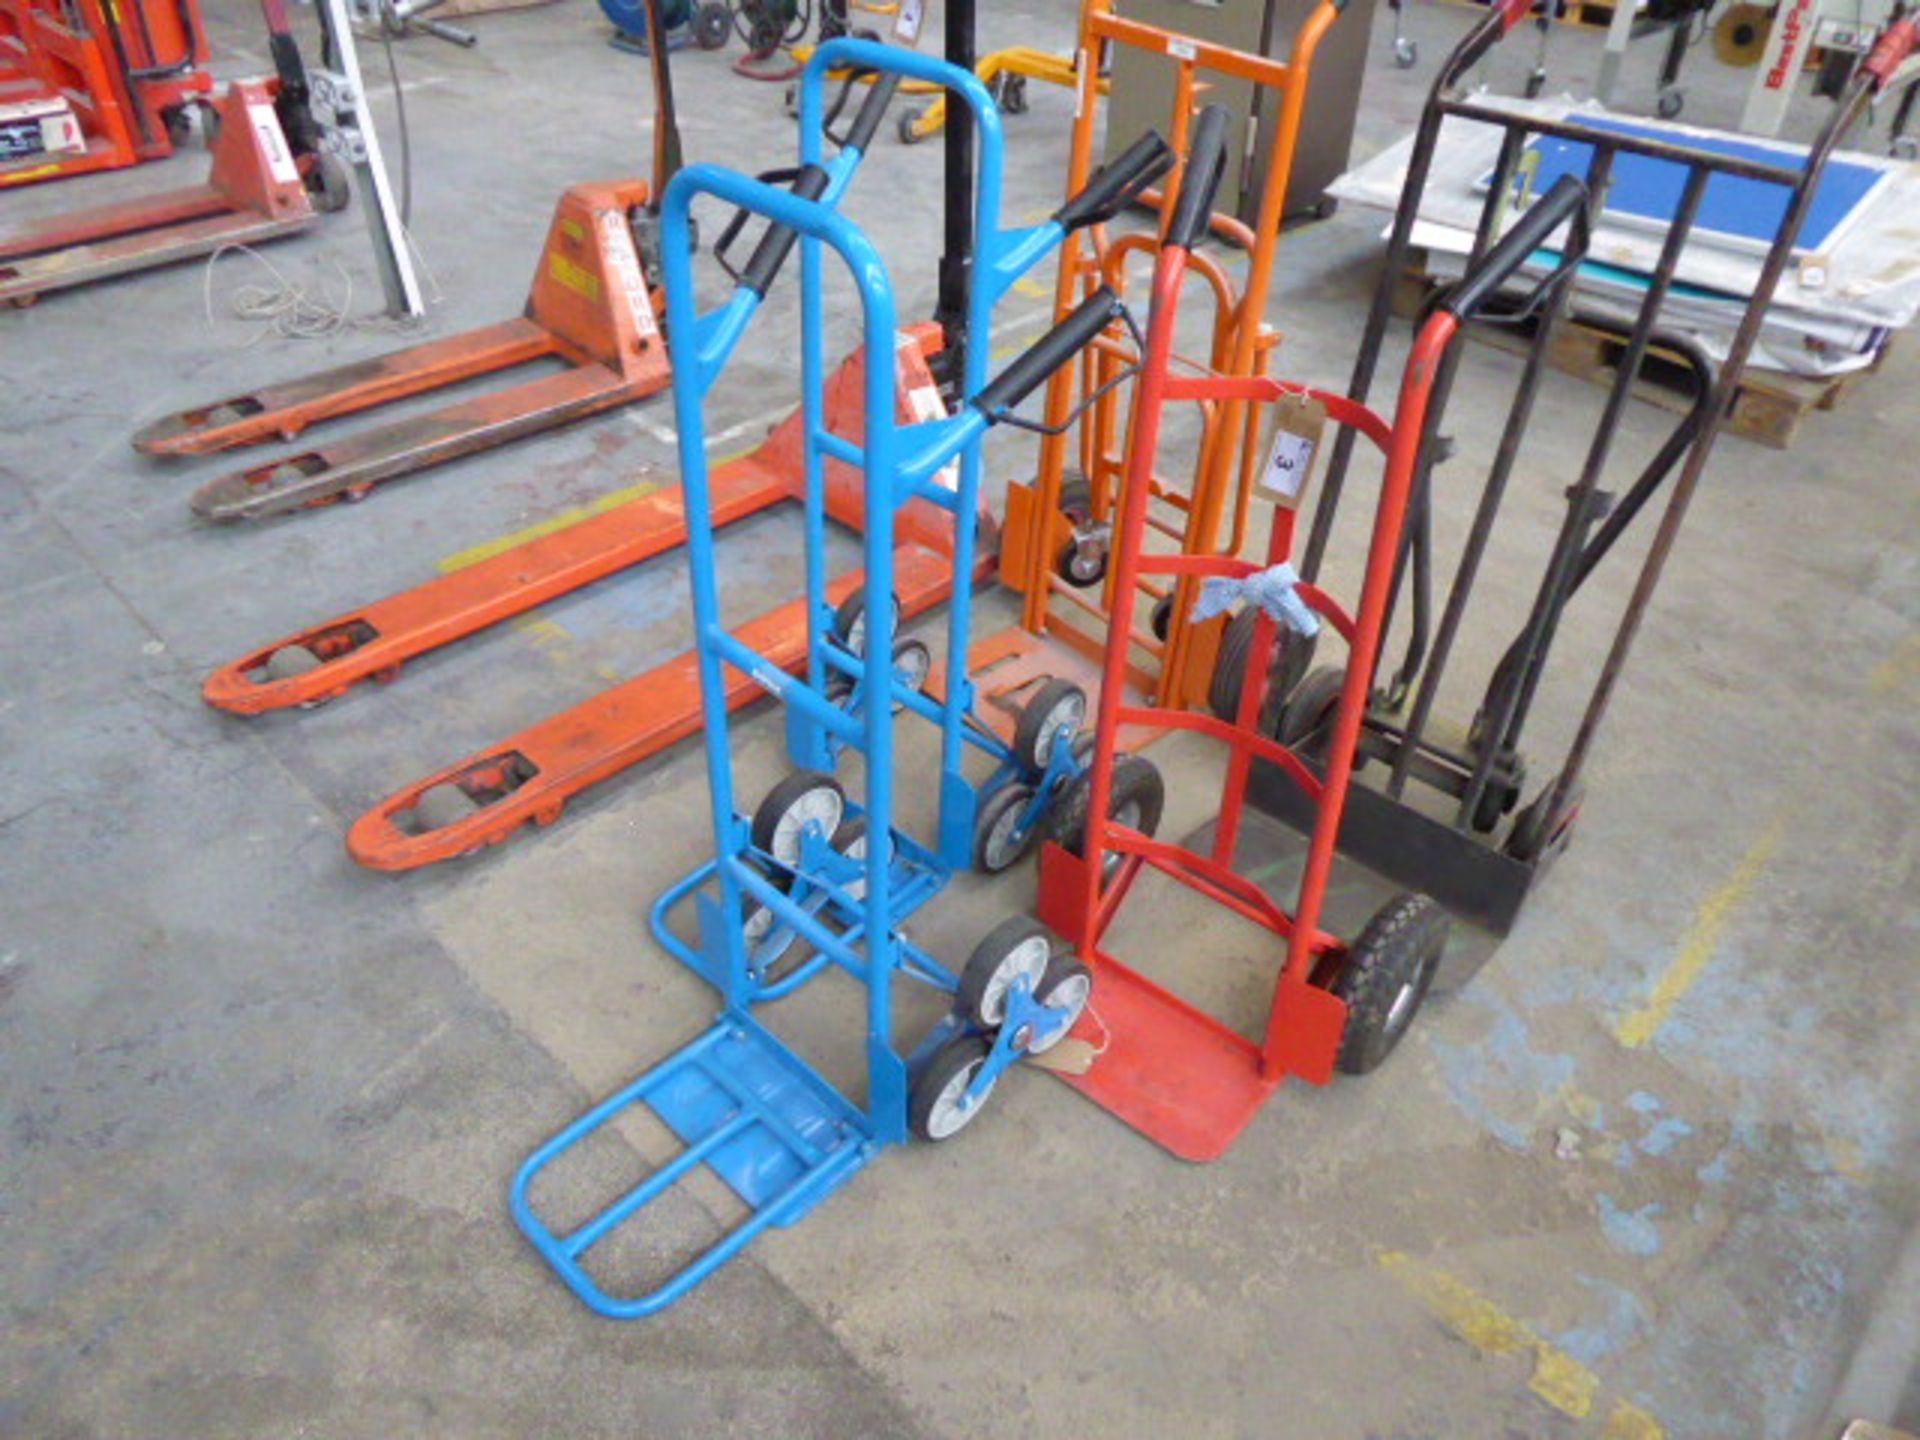 2 blue stair lifting sack barrows and 3 other various sack barrows